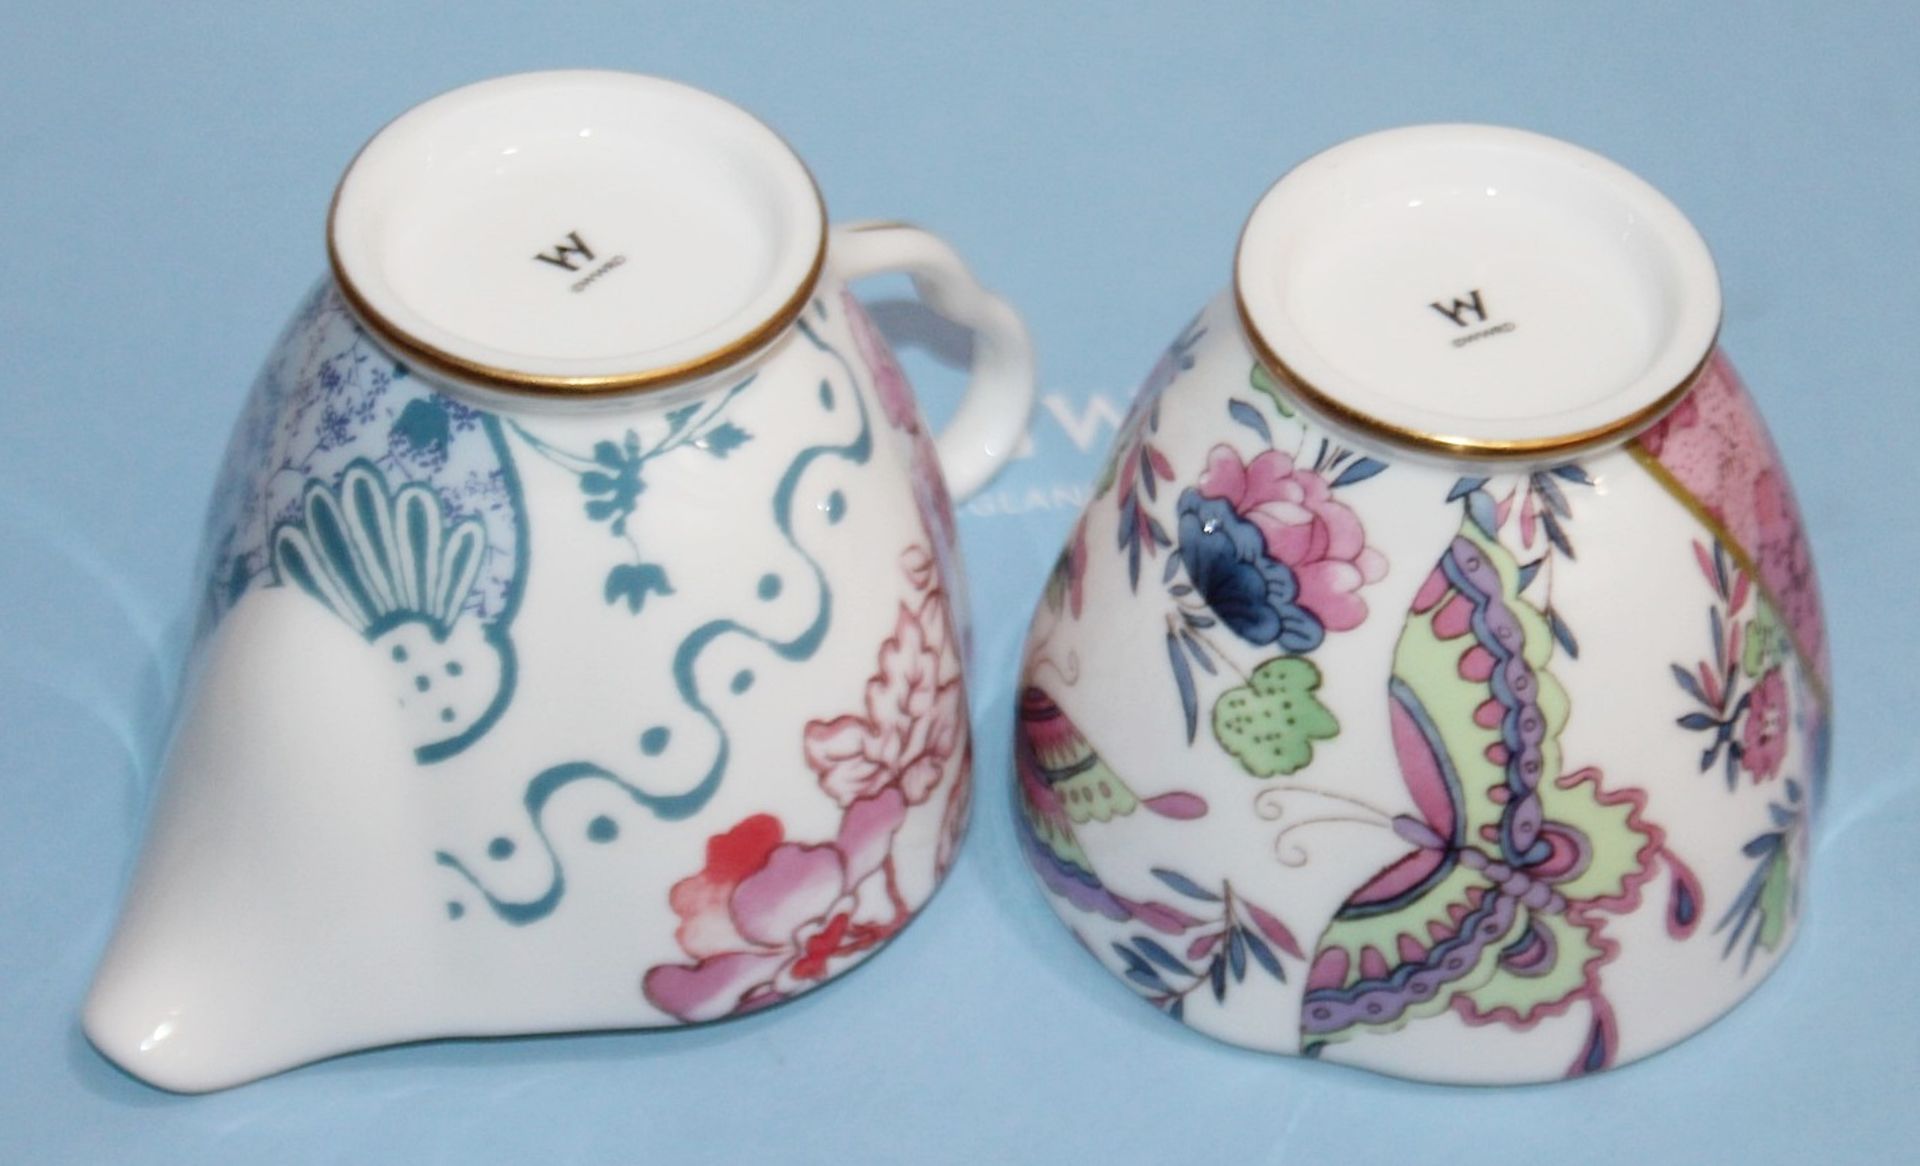 1 x WEDGWOOD 'Butterfly Bloom' Fine Bone China Teapot, Creamer And Sugar Bowl Set - RRP £195.00 - Image 7 of 8